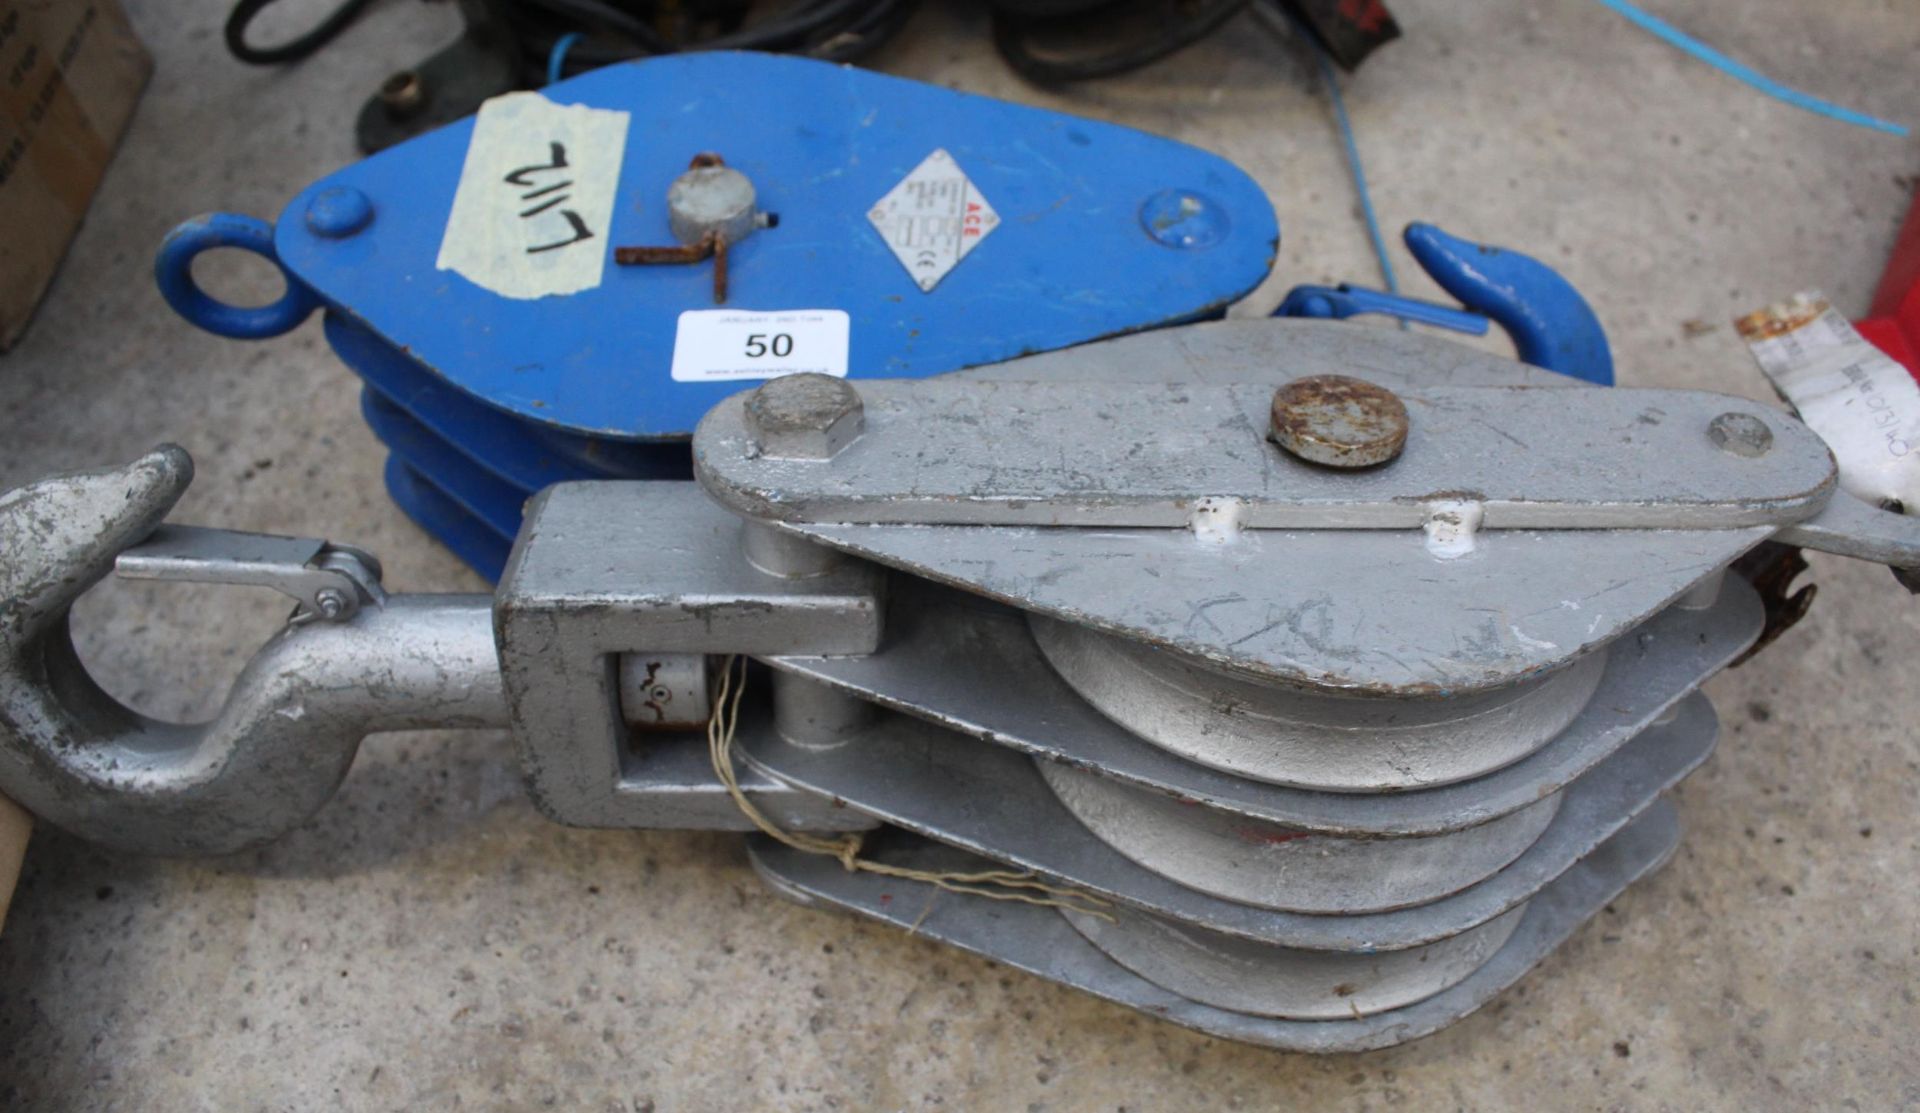 TWO LARGE RECOVERY SNATCH BLOCKS PLUS VAT